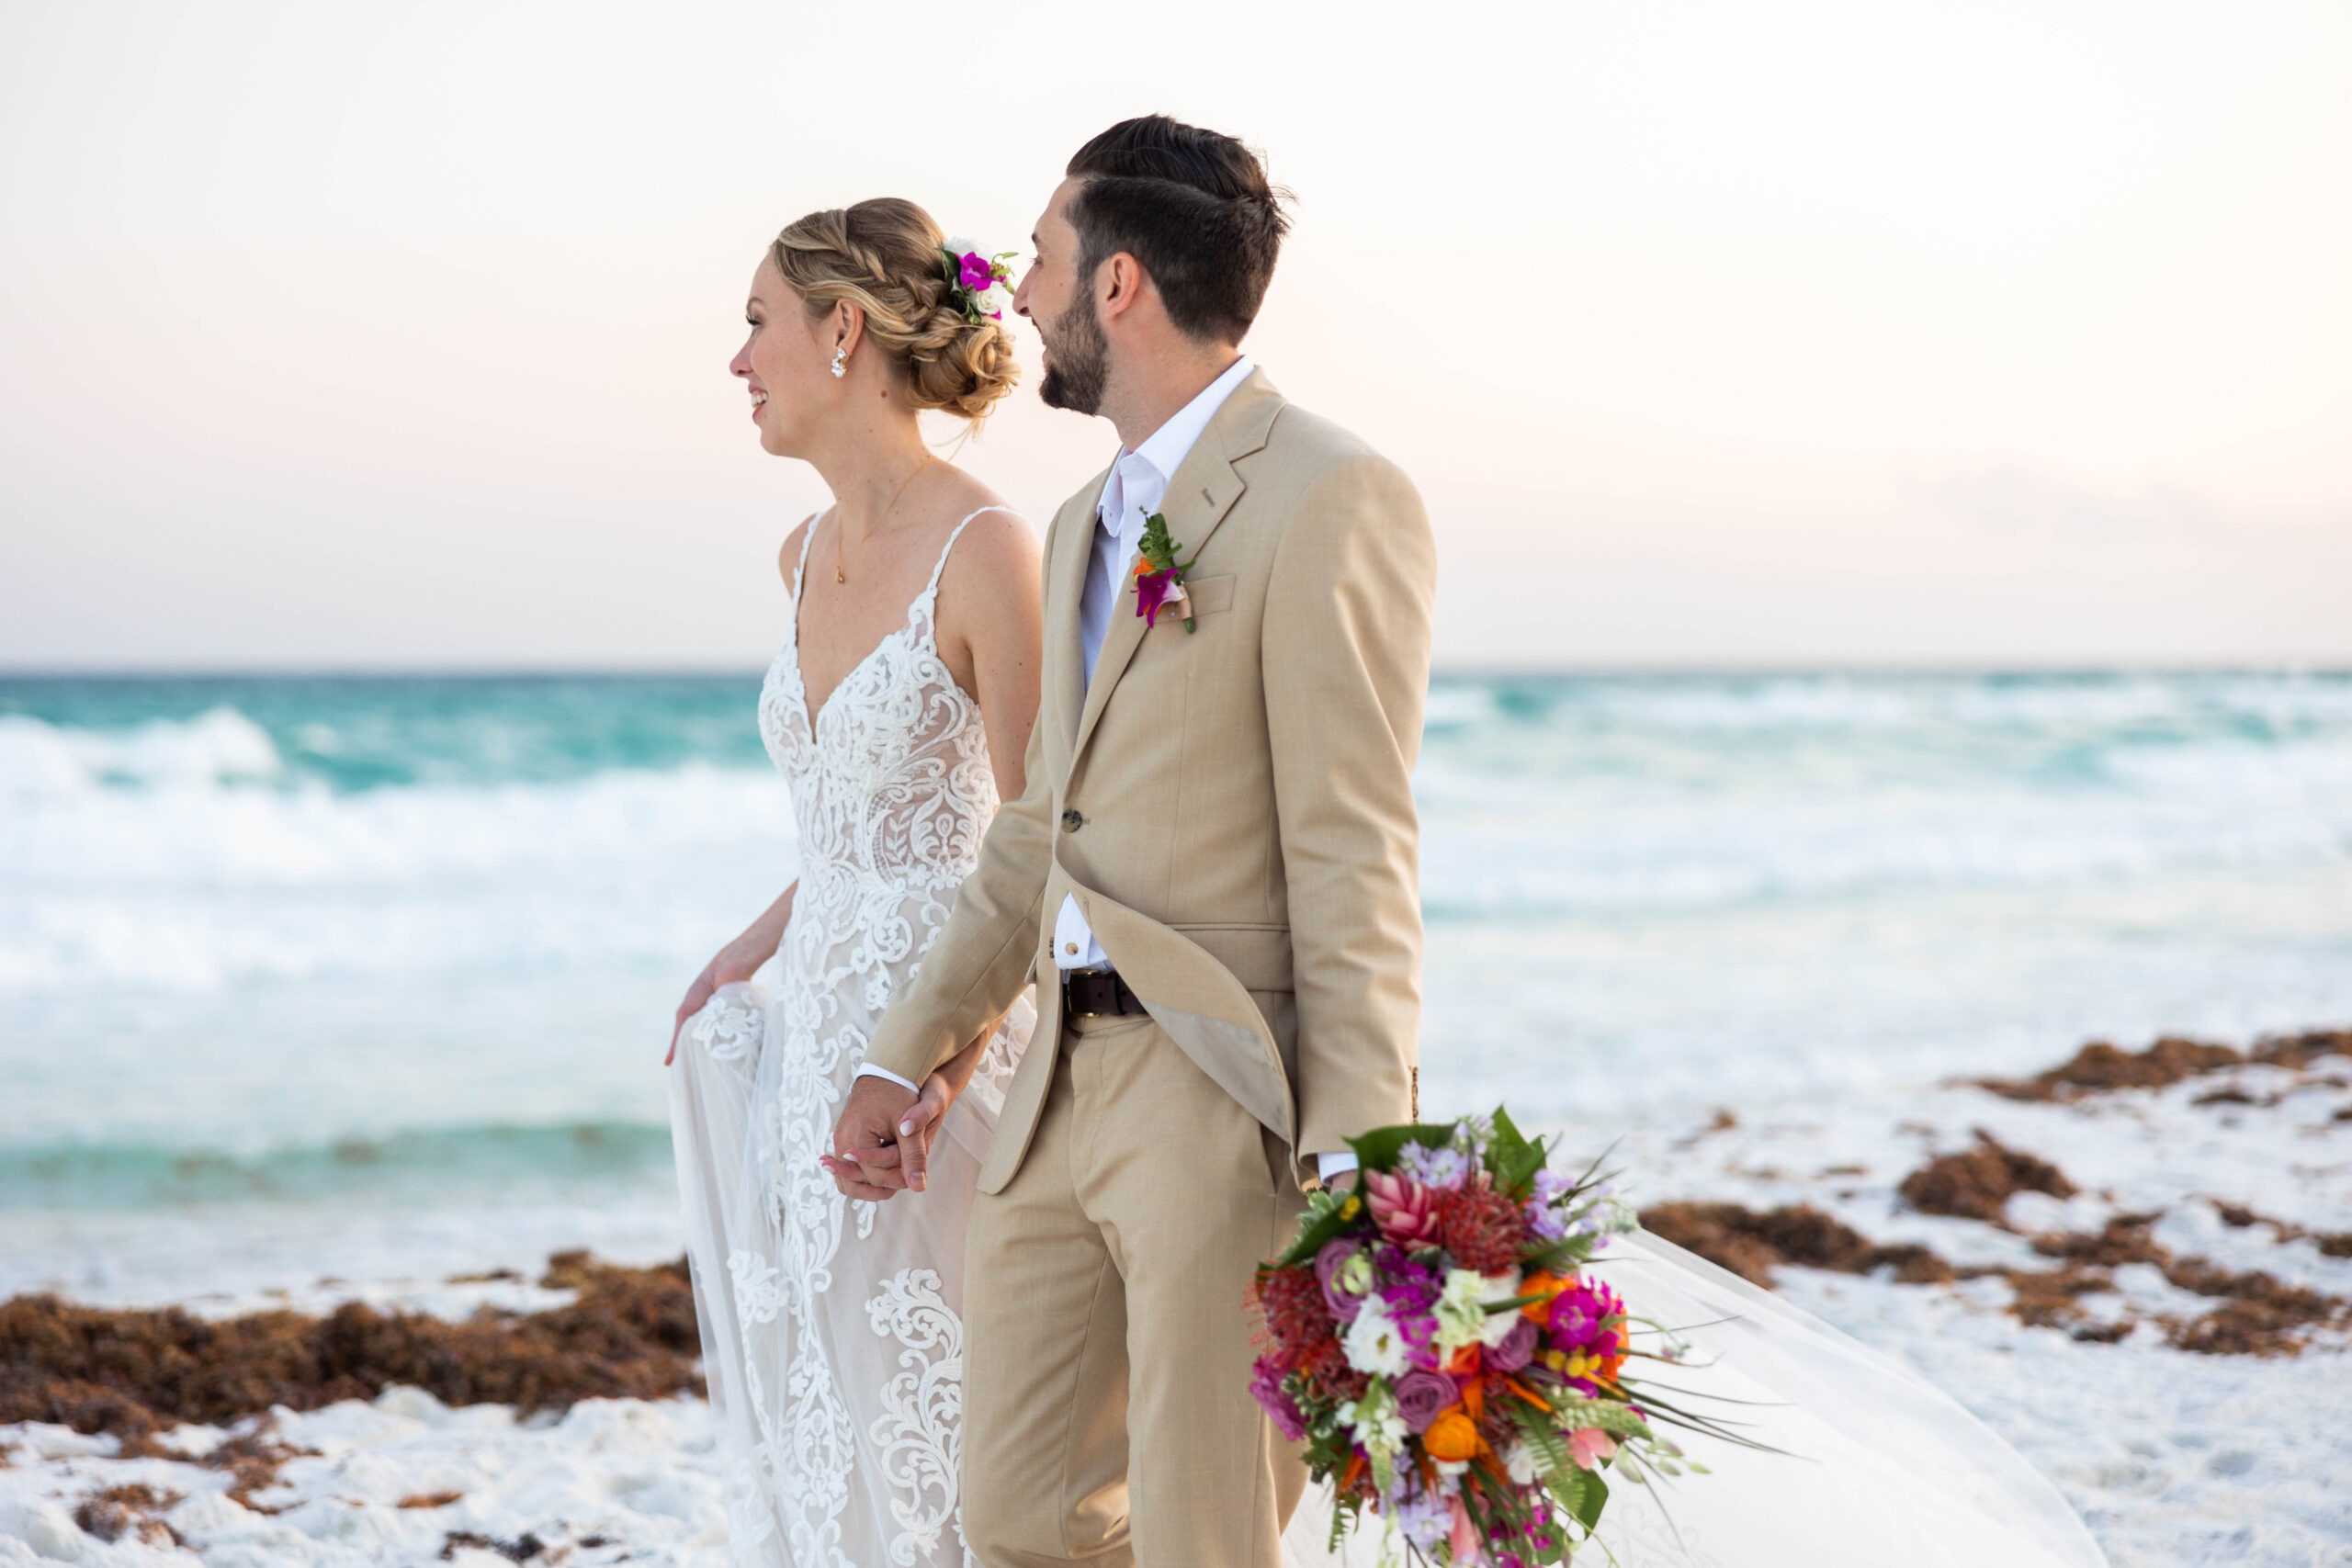 Eloping: Pros and Cons of Destination Elopements